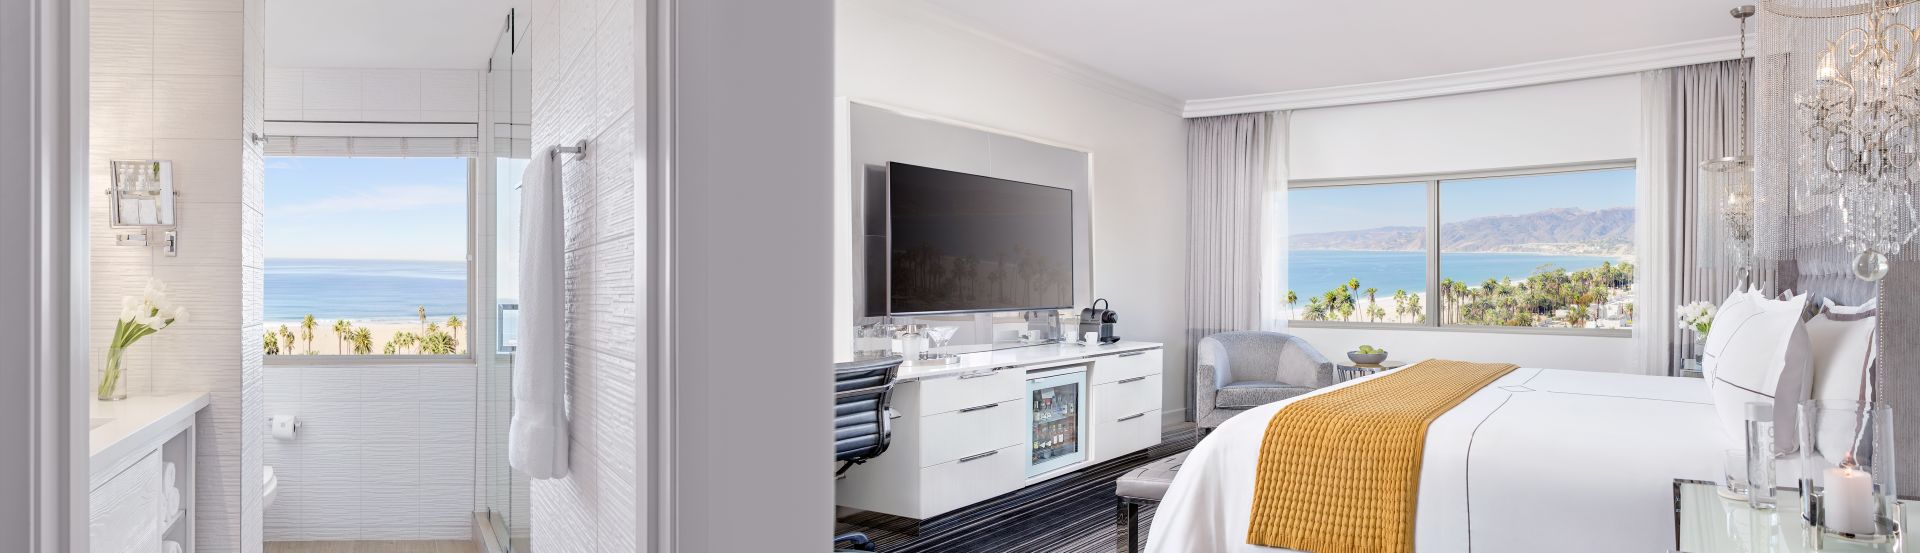 Rooms & Suites LUXURY ACCOMMODATIONS IN SANTA MONICA 